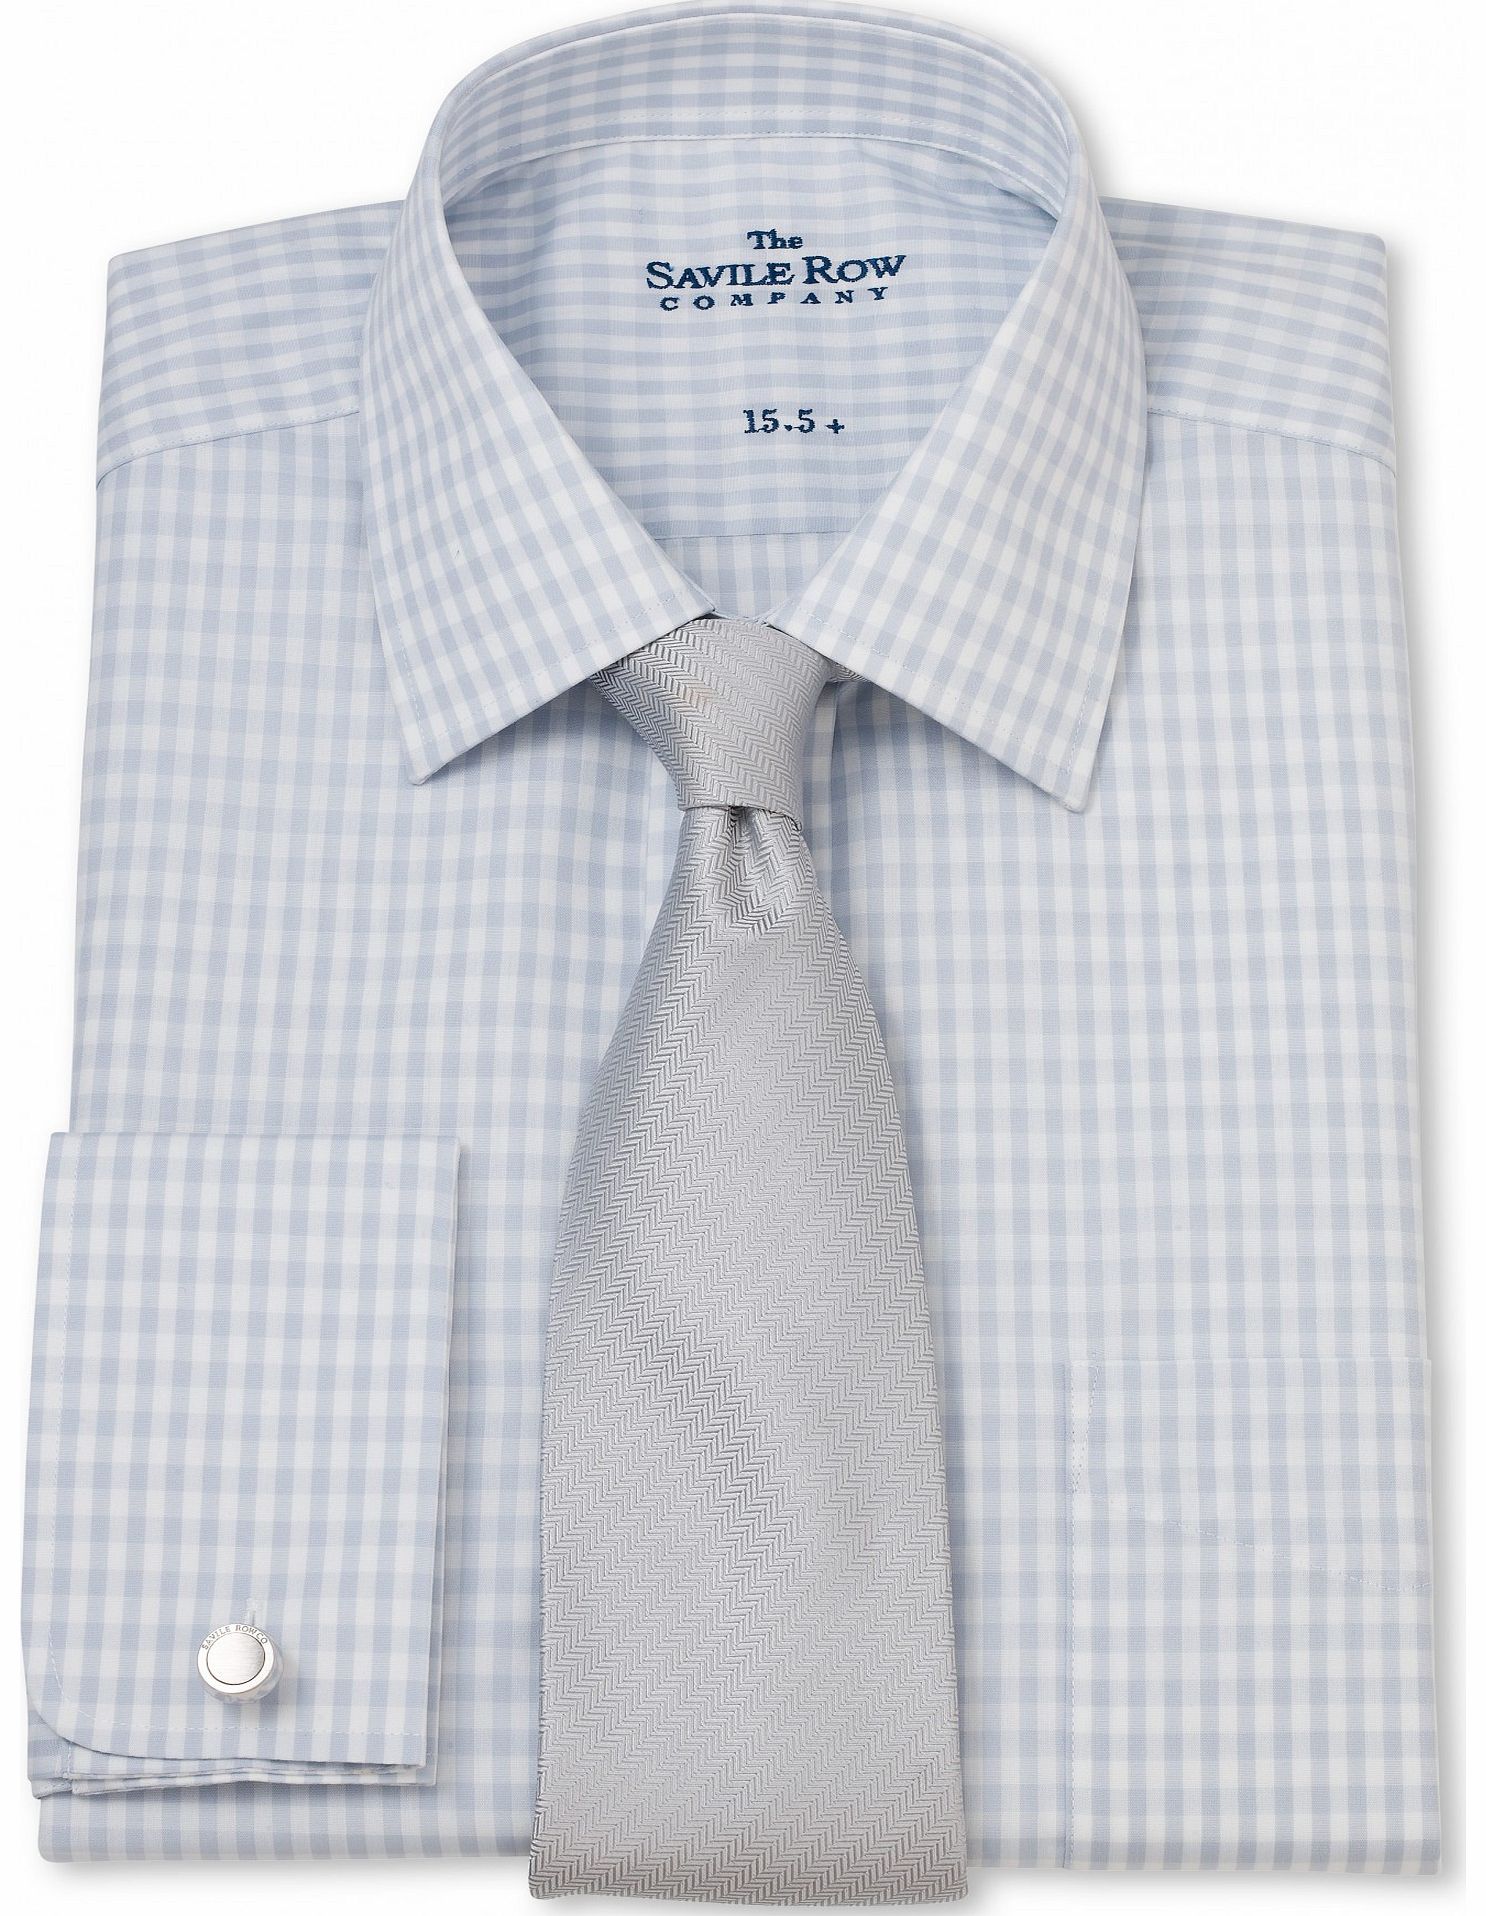 Savile Row Company Grey White Gingham Check Classic Fit Shirt 17``